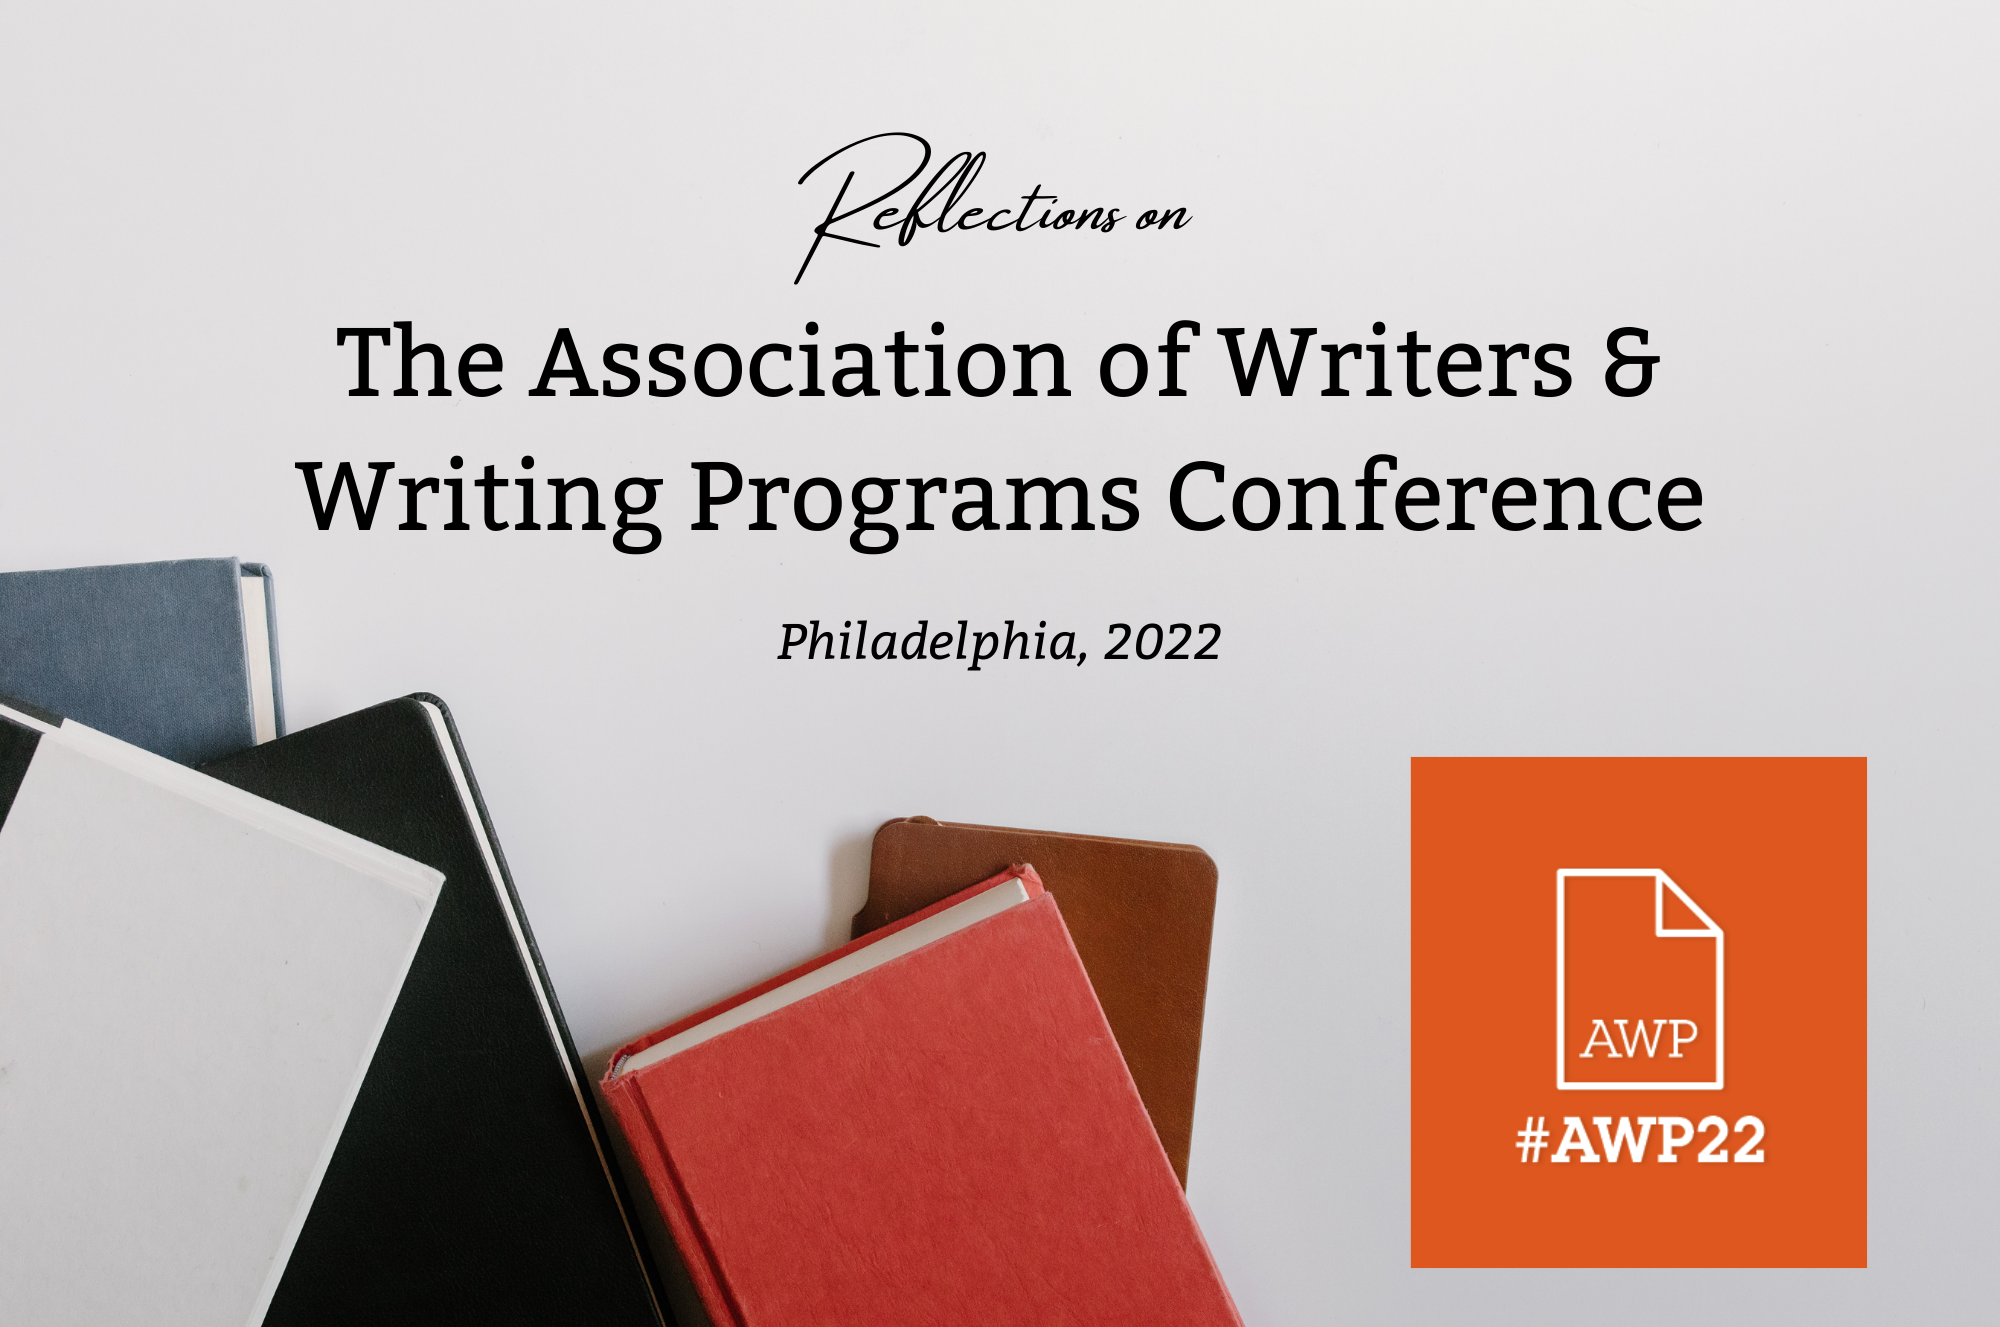 A First-timer’s Reflection on the AWP Conference